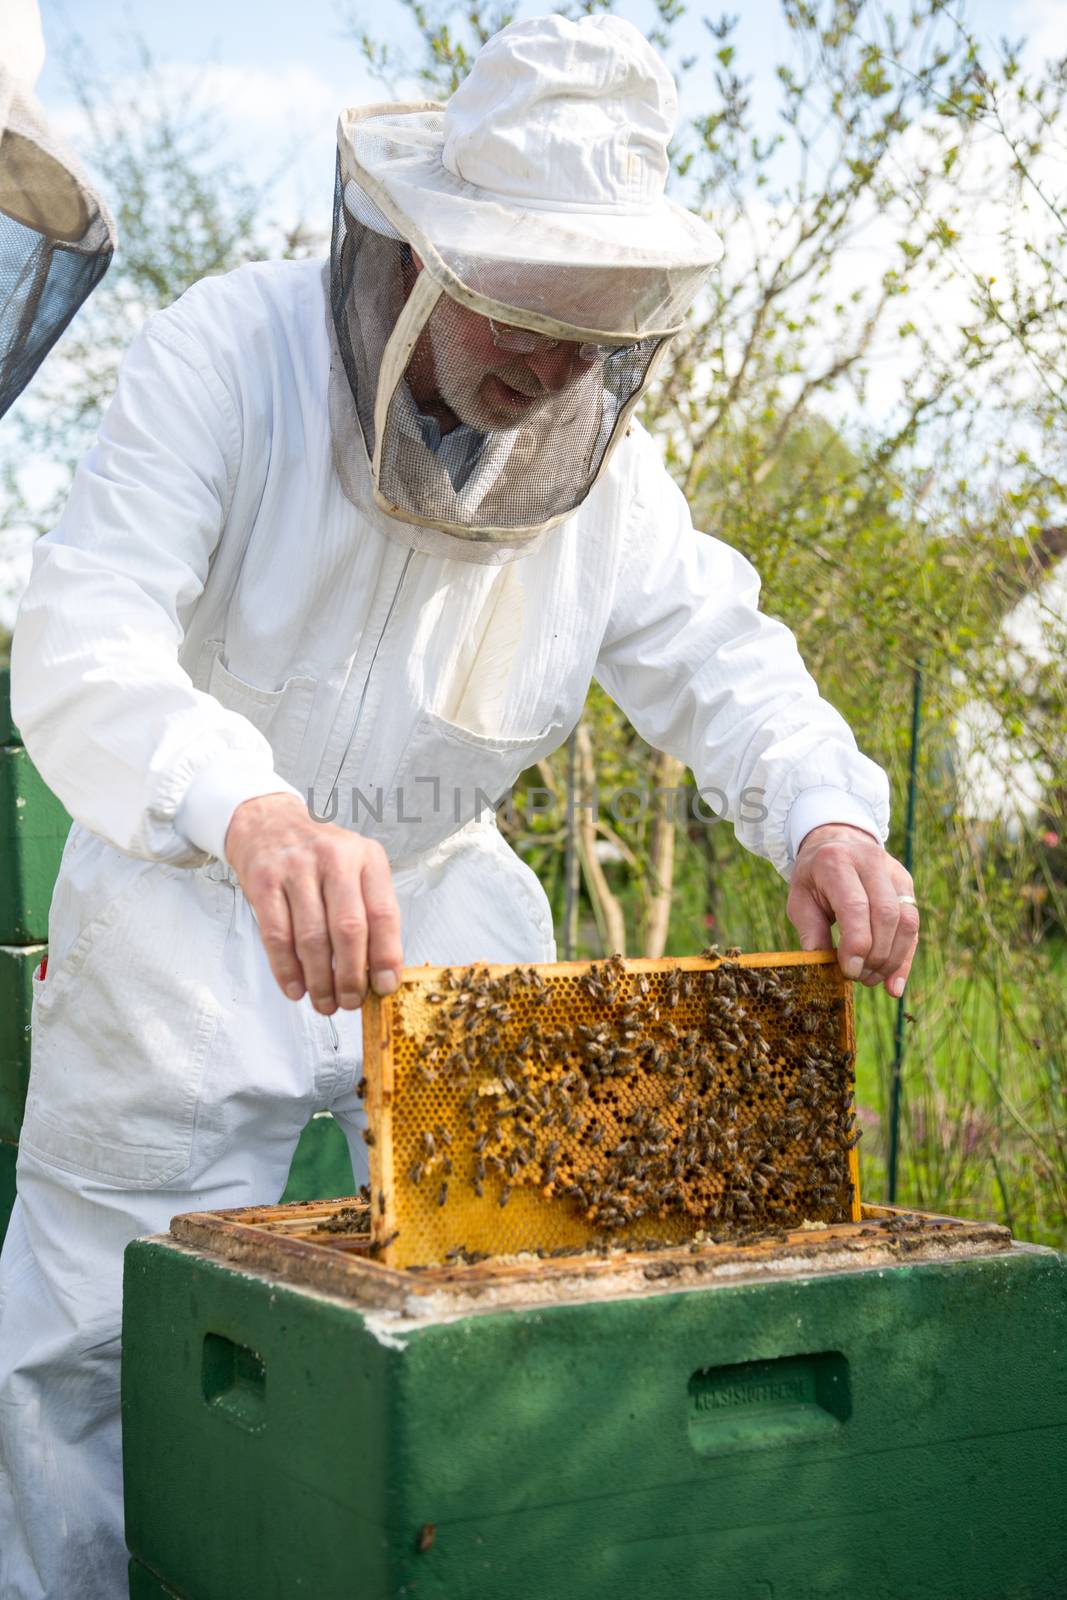 Beekeeper checking a beehive to ensure health of the bee colony or collecting honey